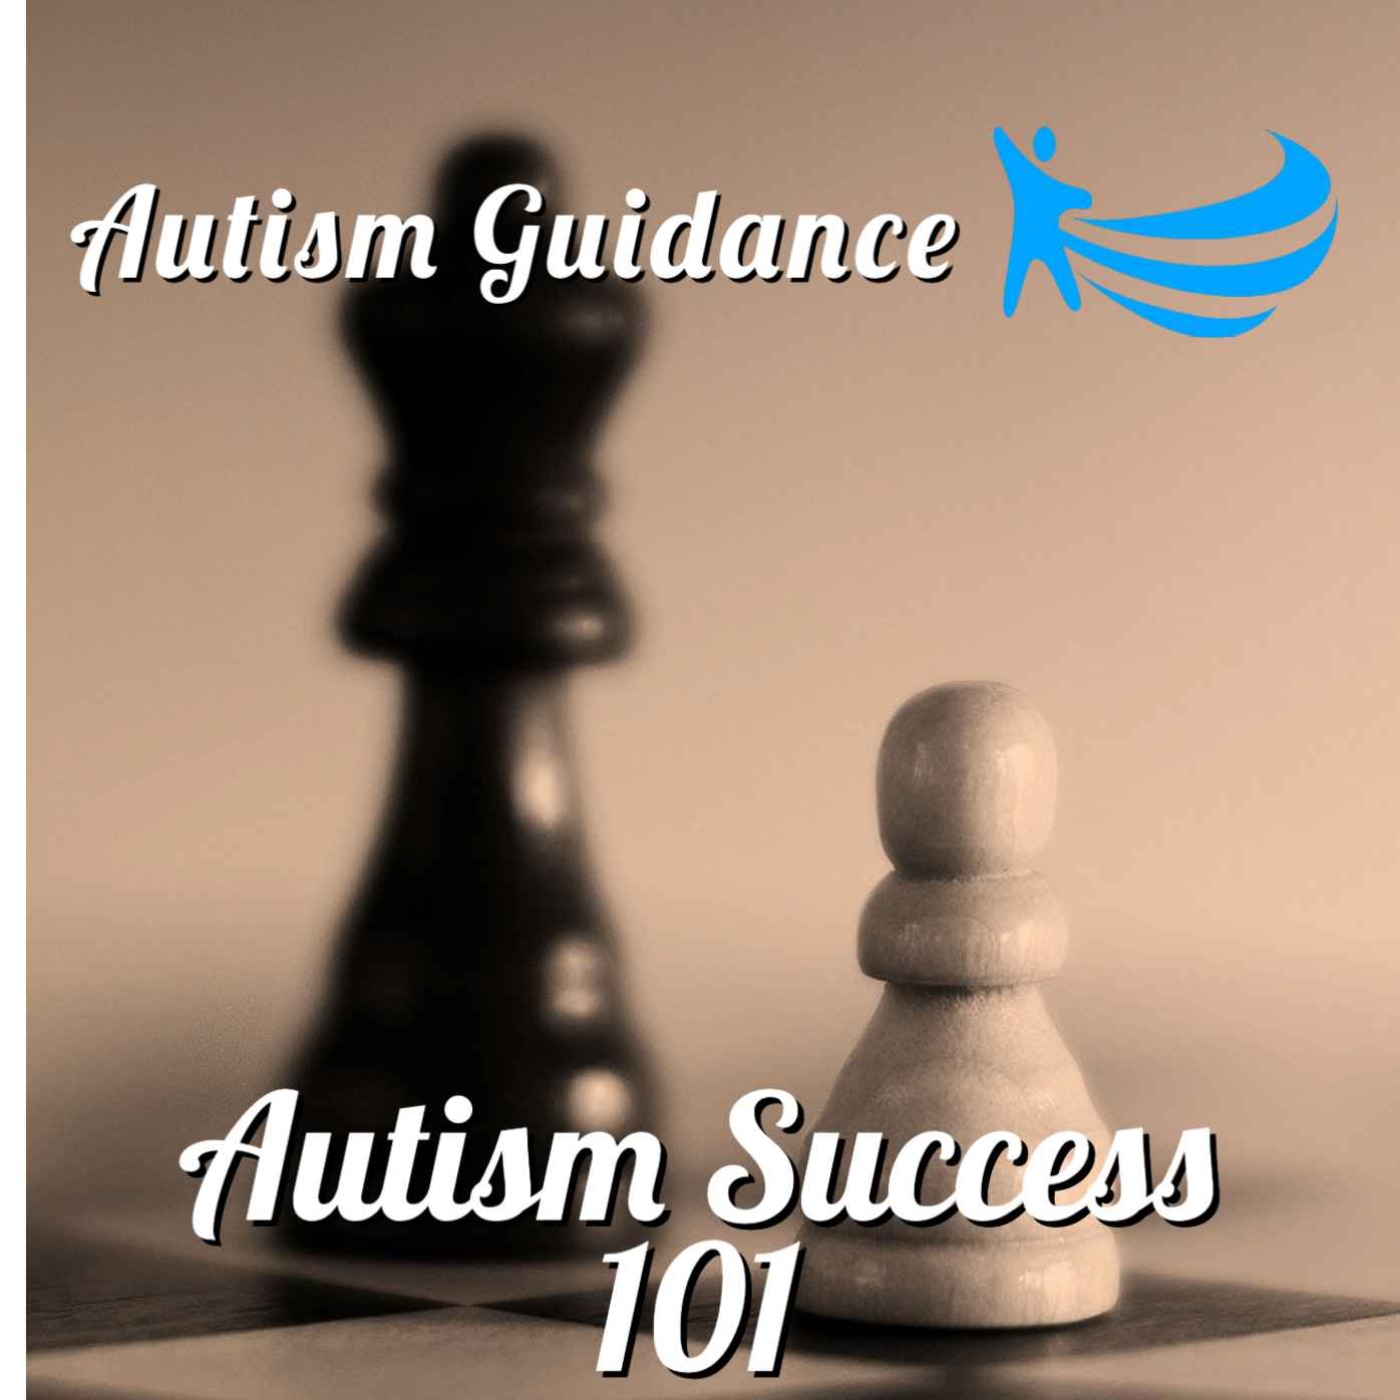 Autism Guidance: Autism Success 101 - Tips to Live Well